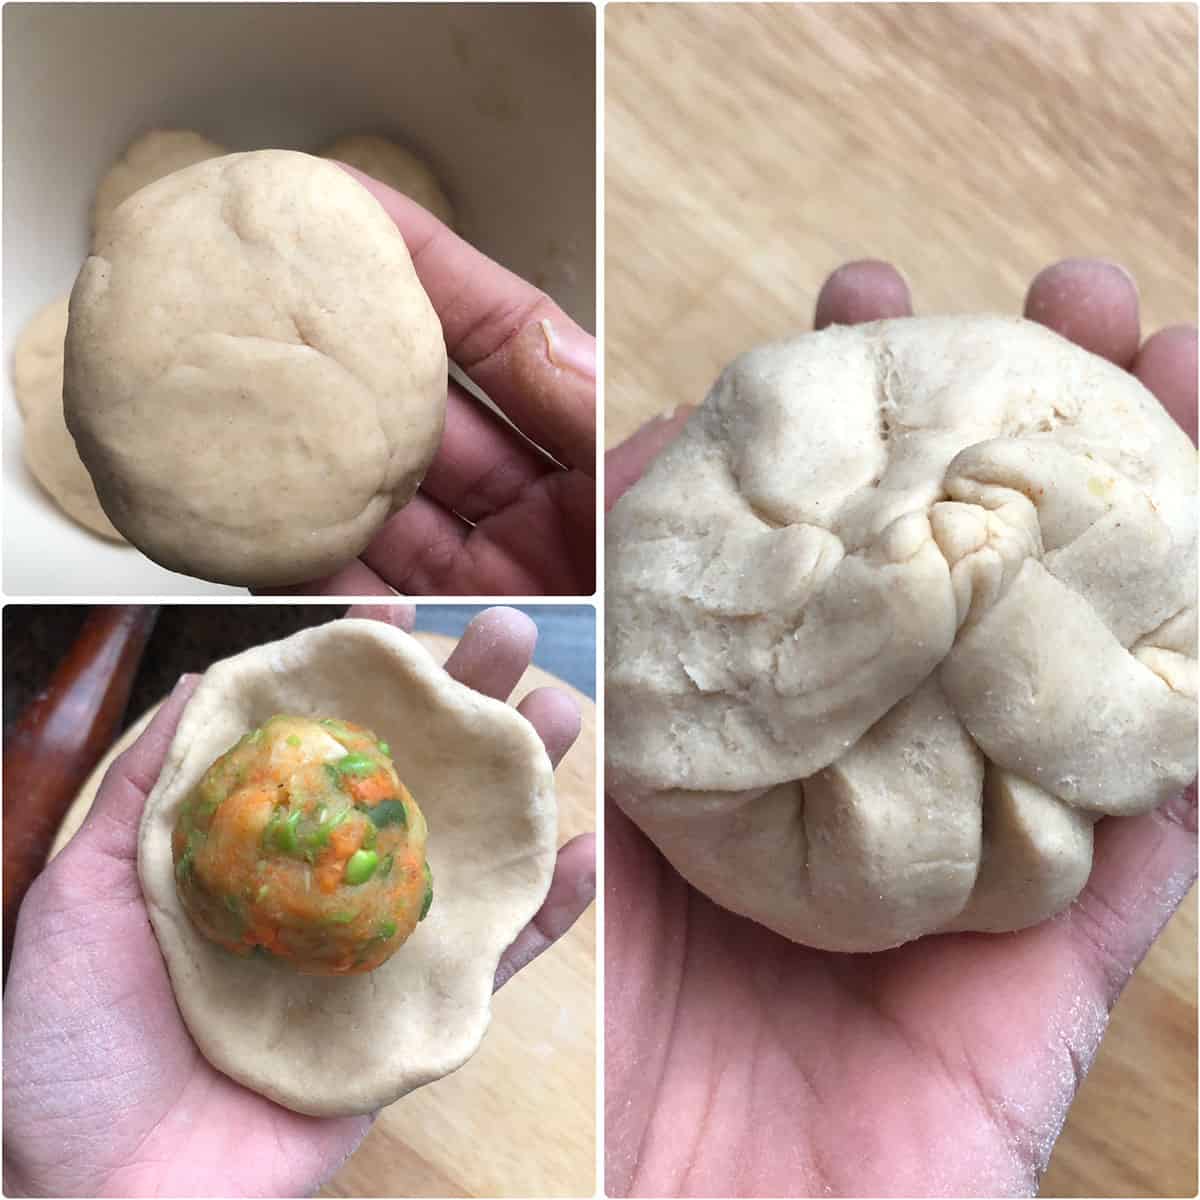 Dough ball formed into a disc and veggie filling placed in the center and covered with the dough